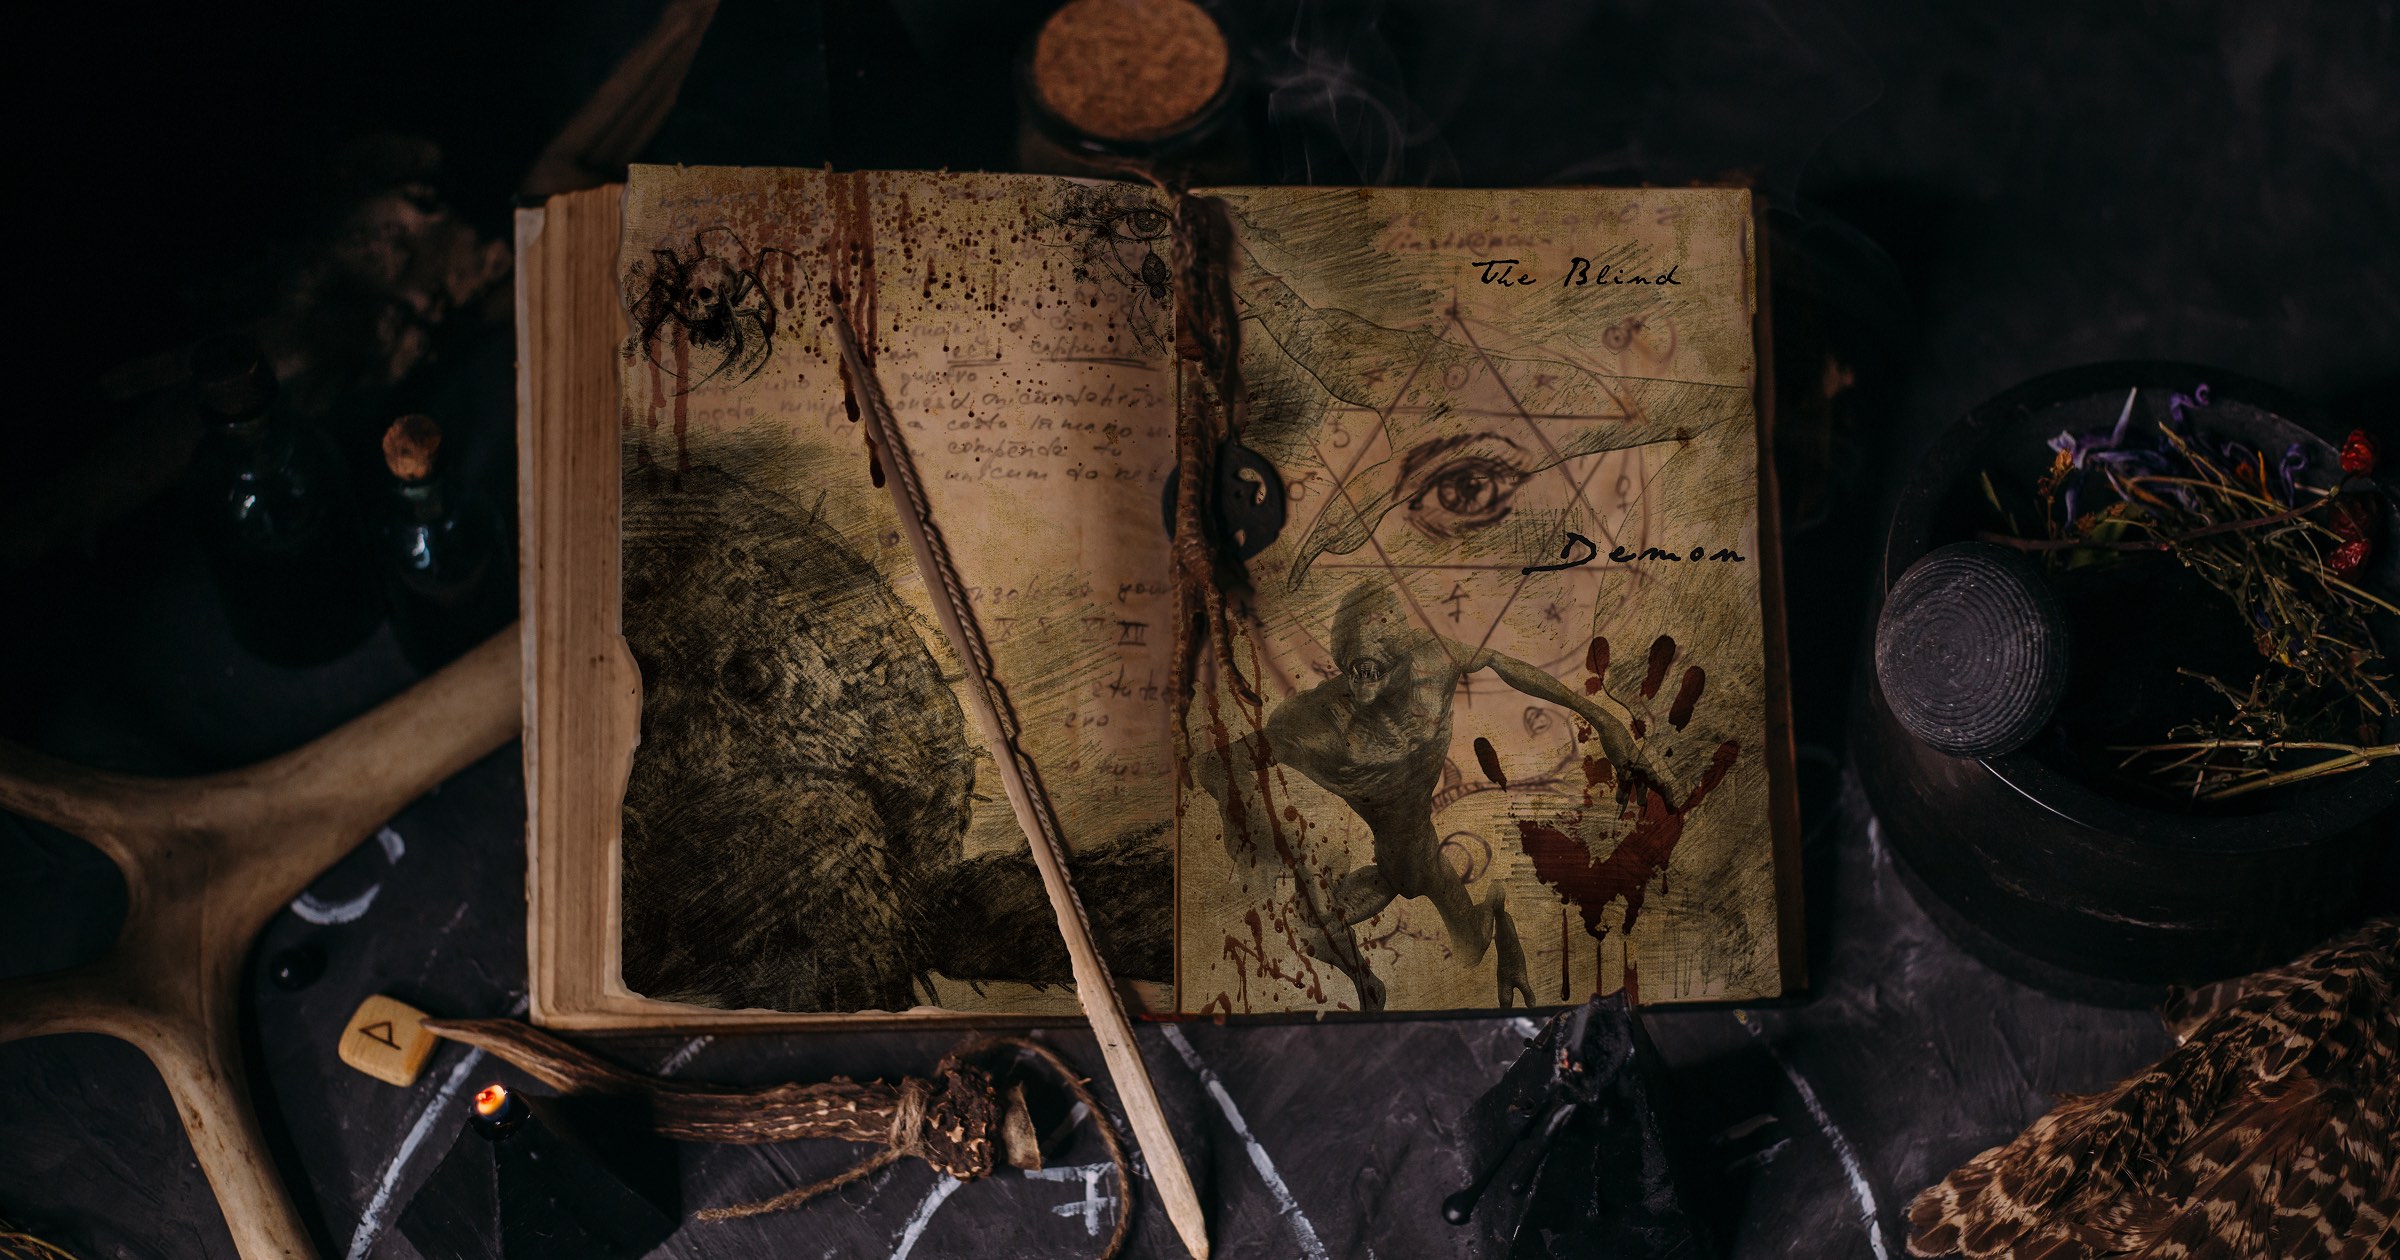 Summon the Seven Princes of Hell With ‘The Book of Asmodeus’